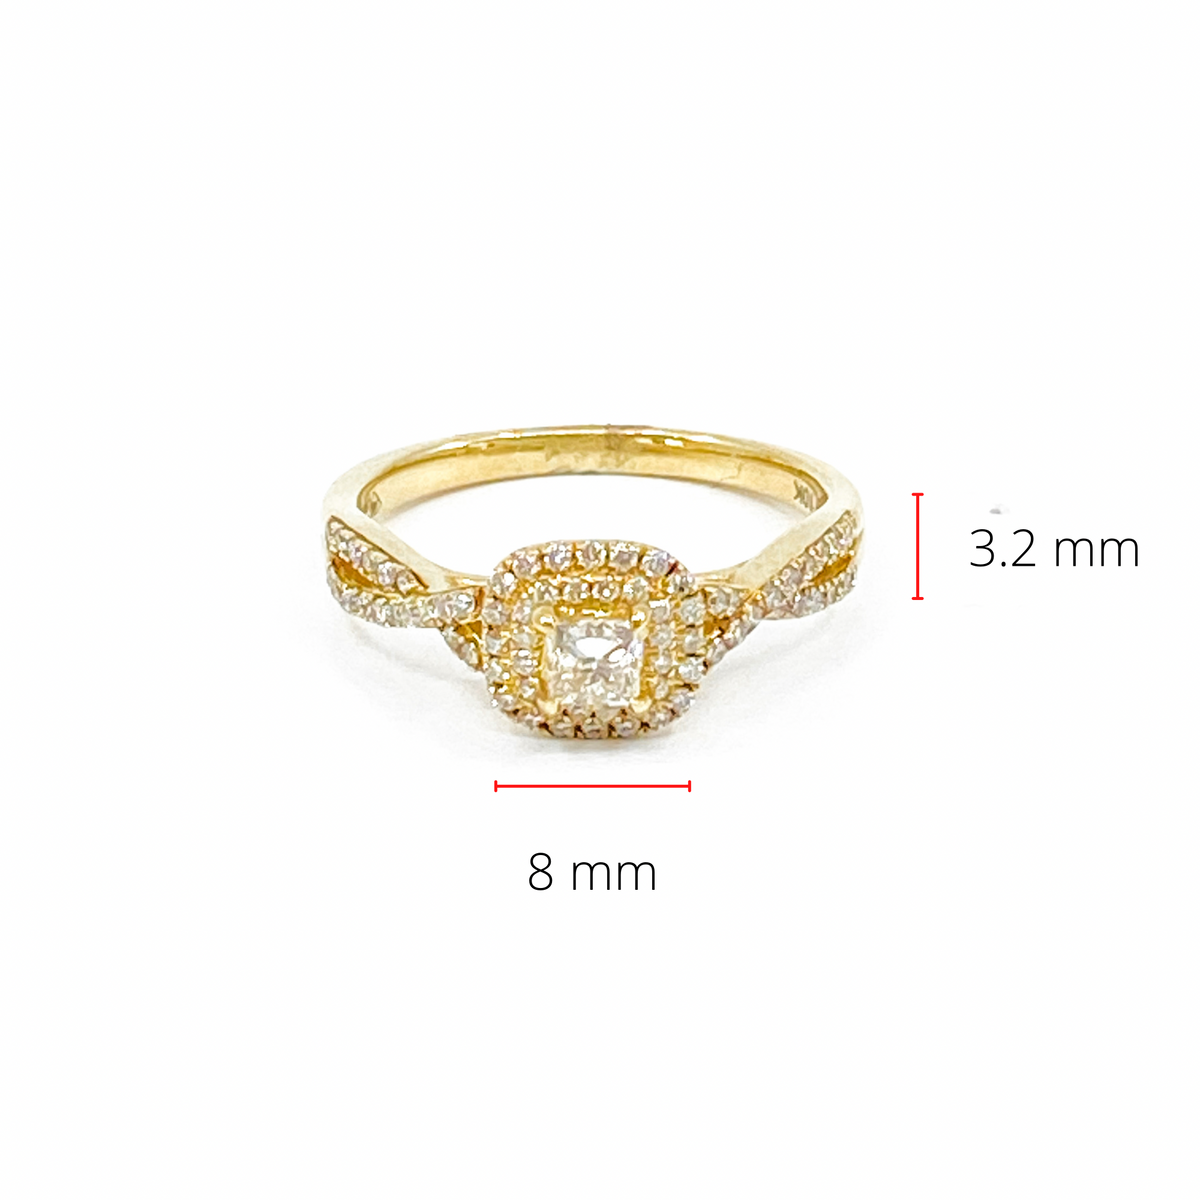 10K Yellow Gold 0.50cttw Diamond Halo Engagement Ring, size 6.5